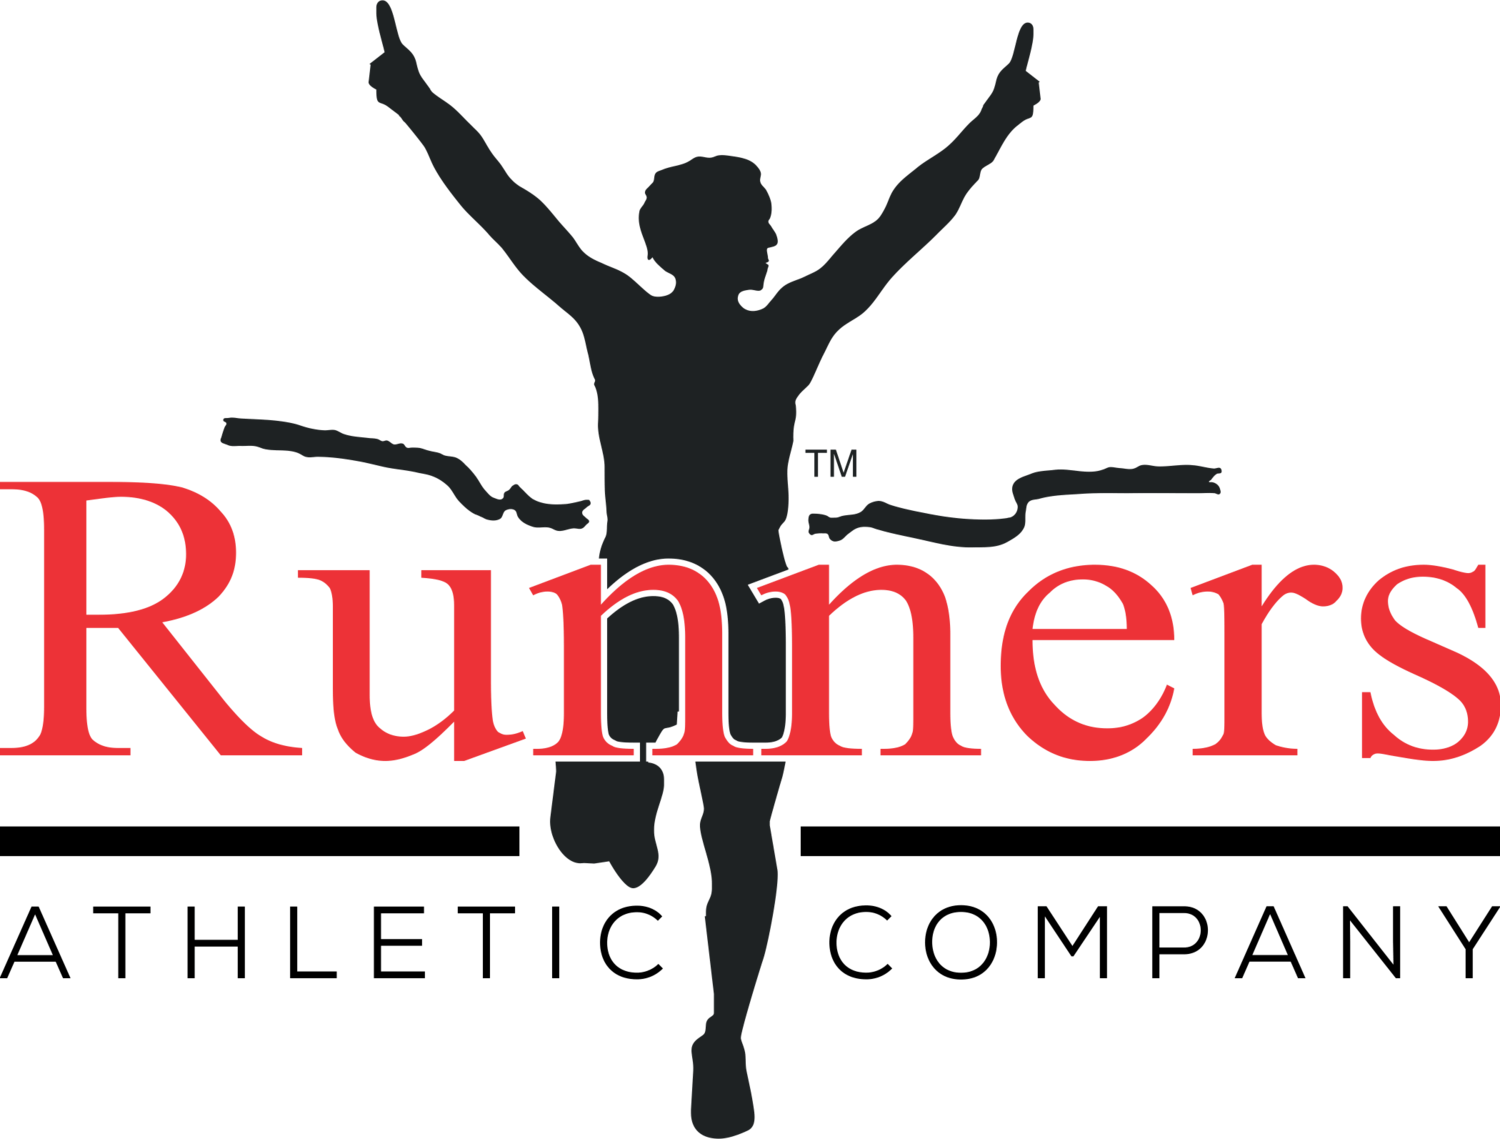 Athletic Company Logo - Runners Athletic Co